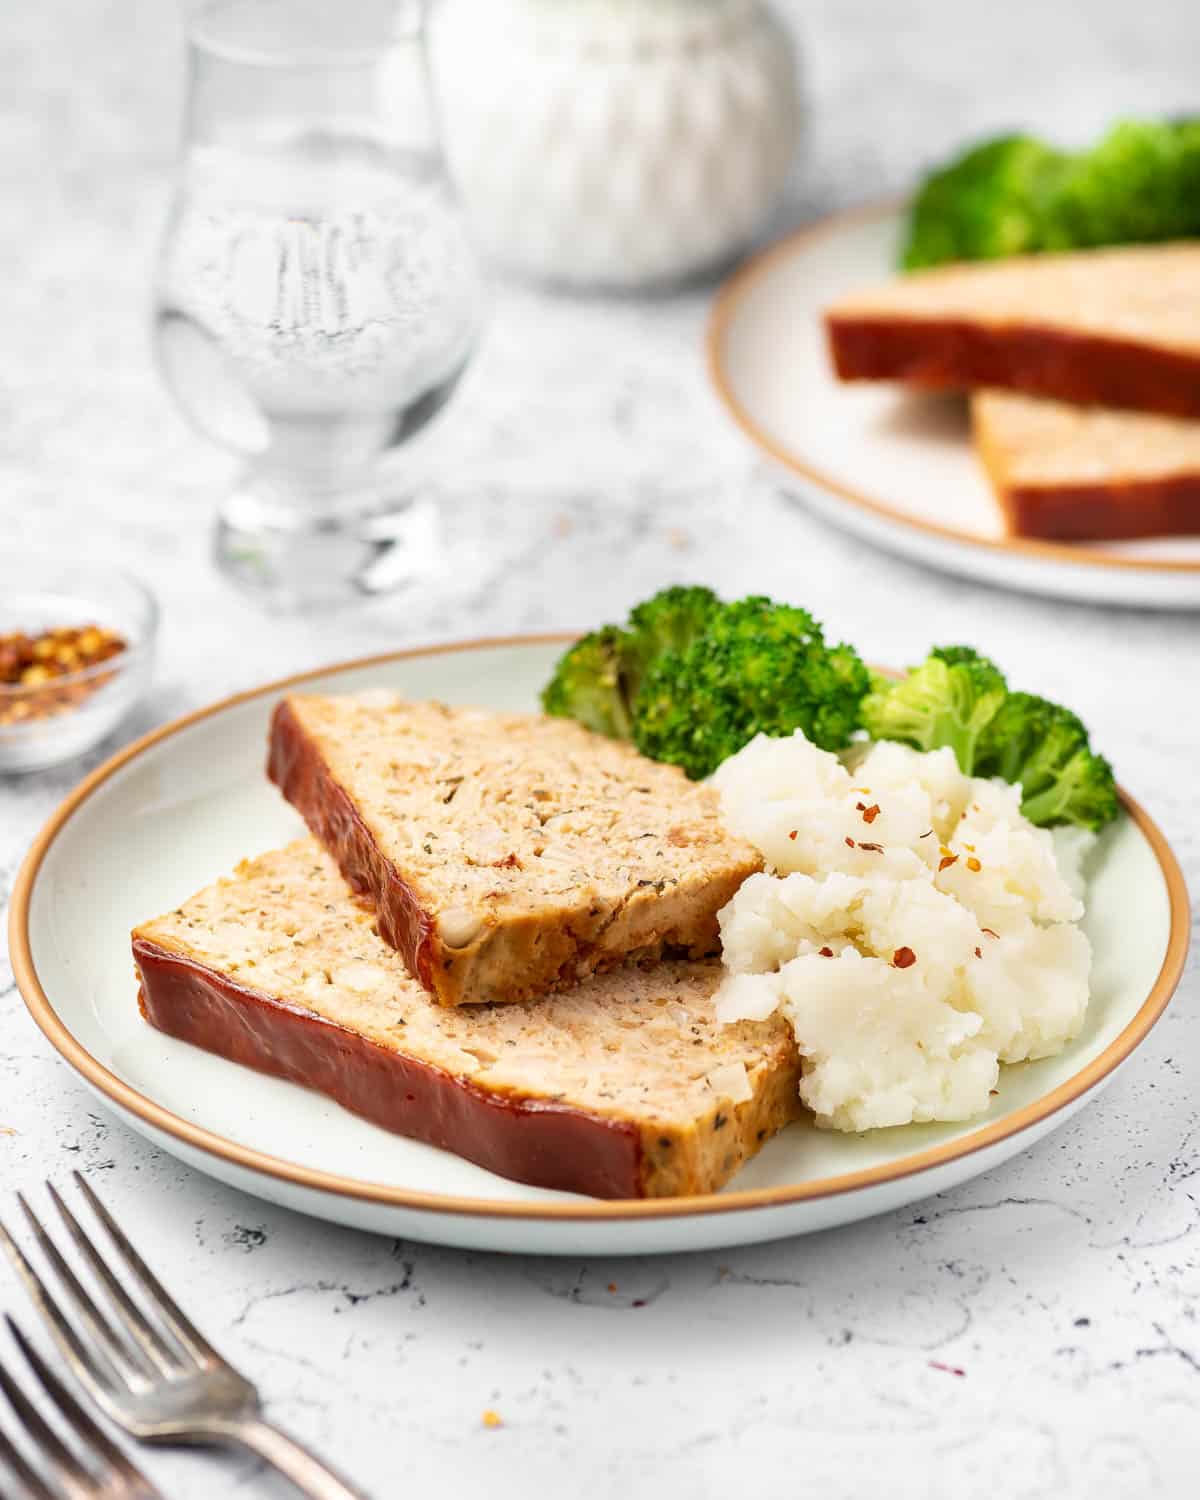 A plate with two slices of chicken meatloaf with mashed potatoes and broccoli.